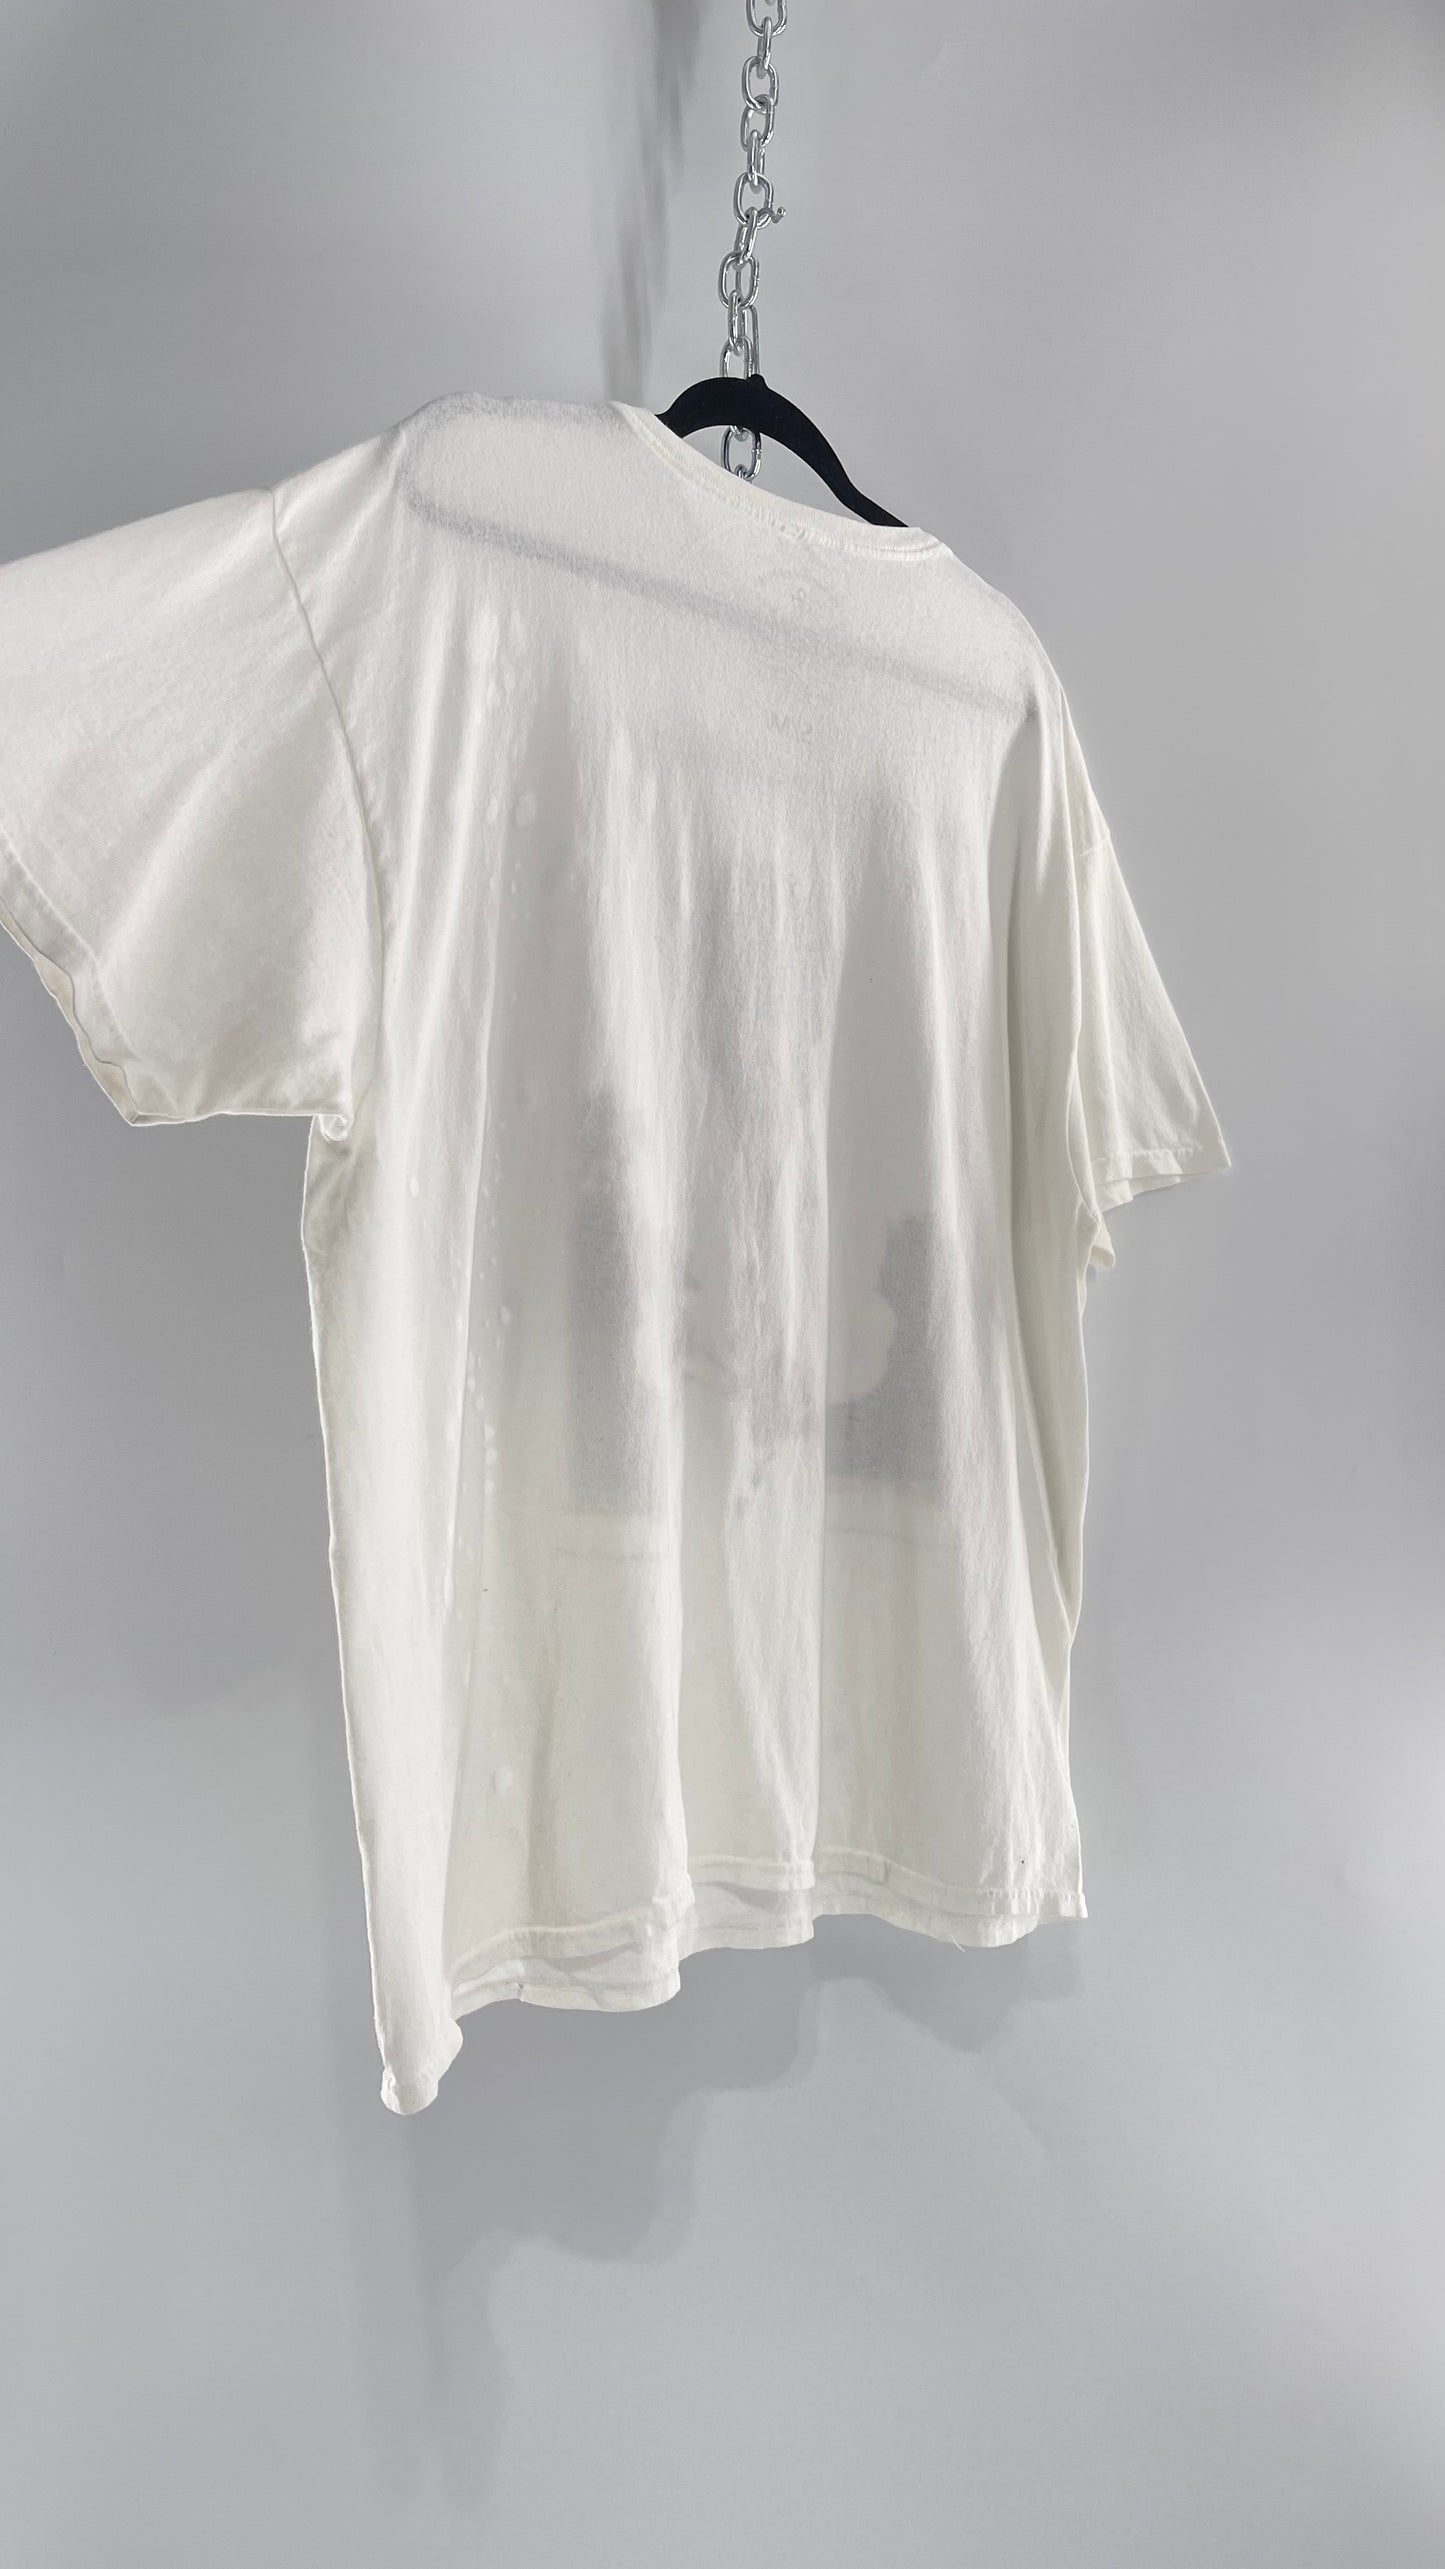 The Prince Estate Oversized Distressed Band T  (S/M)